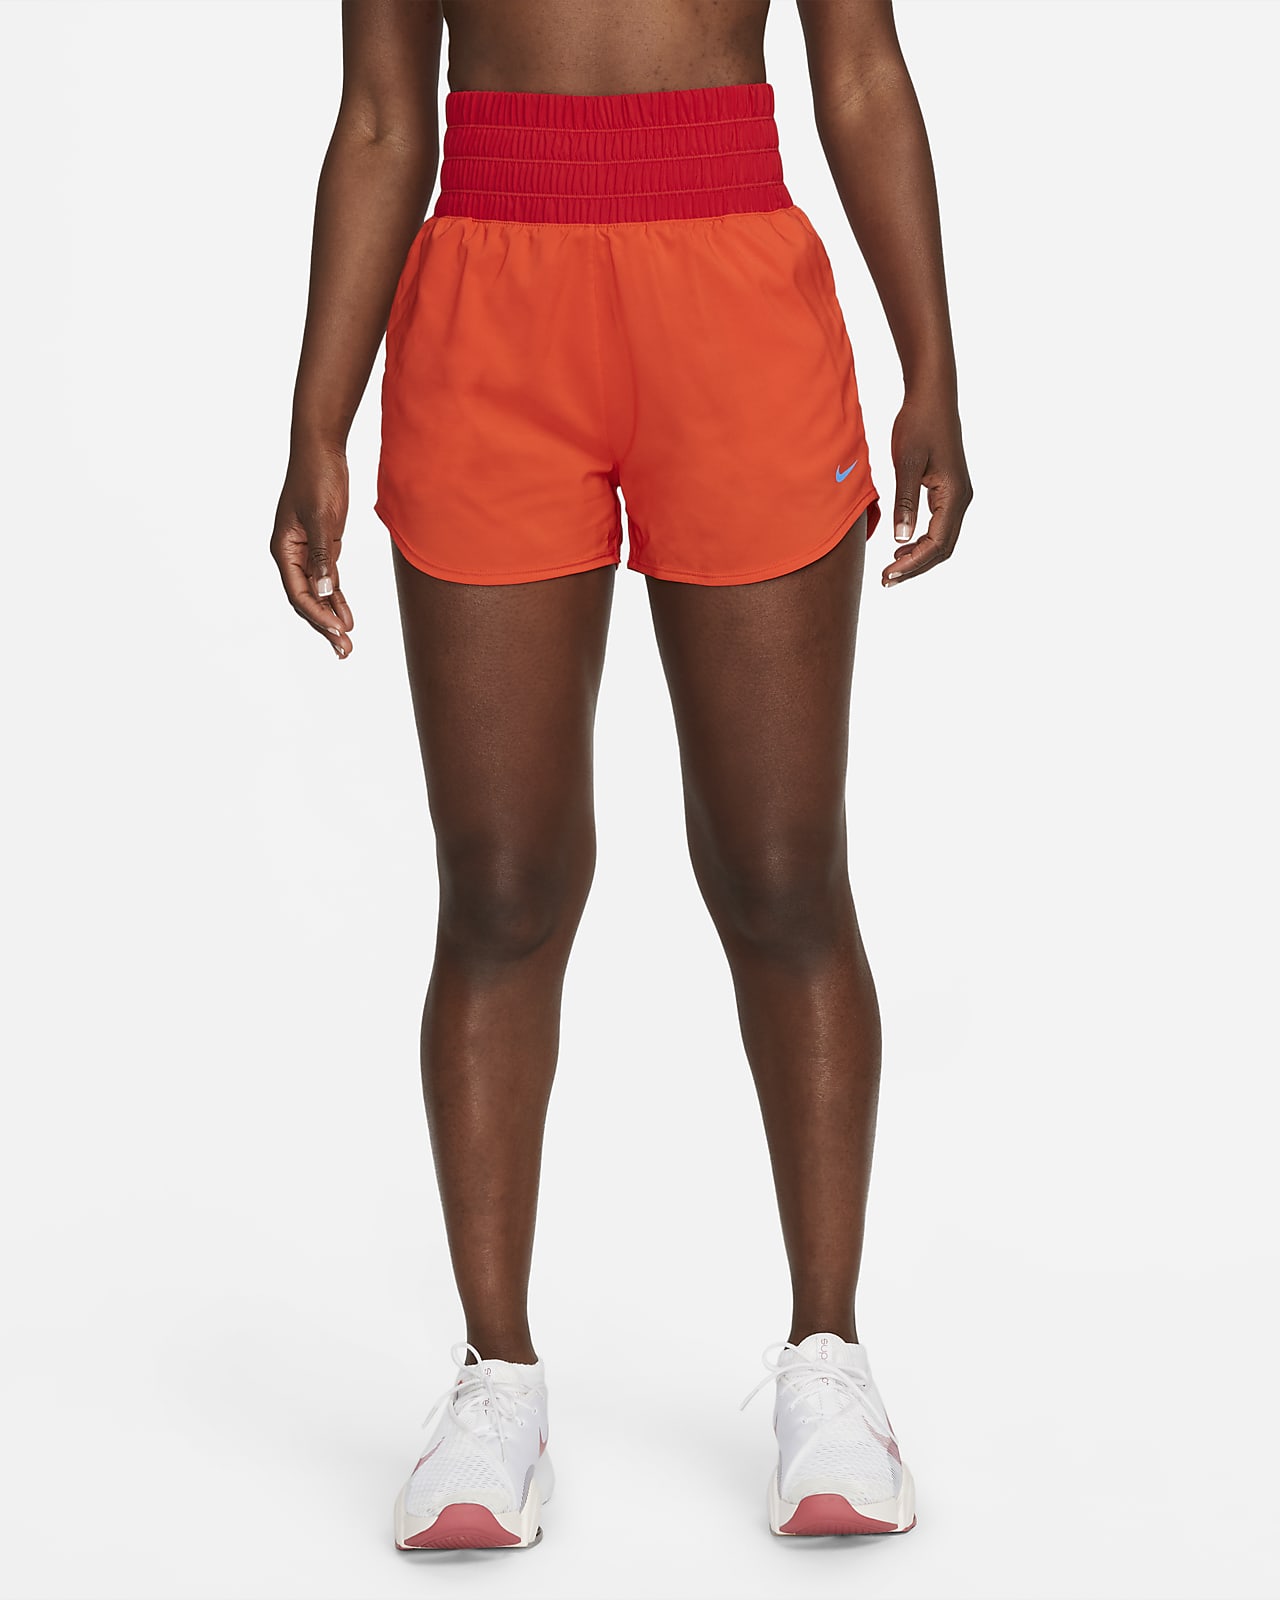 Nike Pro Training Dri-FIT Combat Gear high-waisted booty shorts in